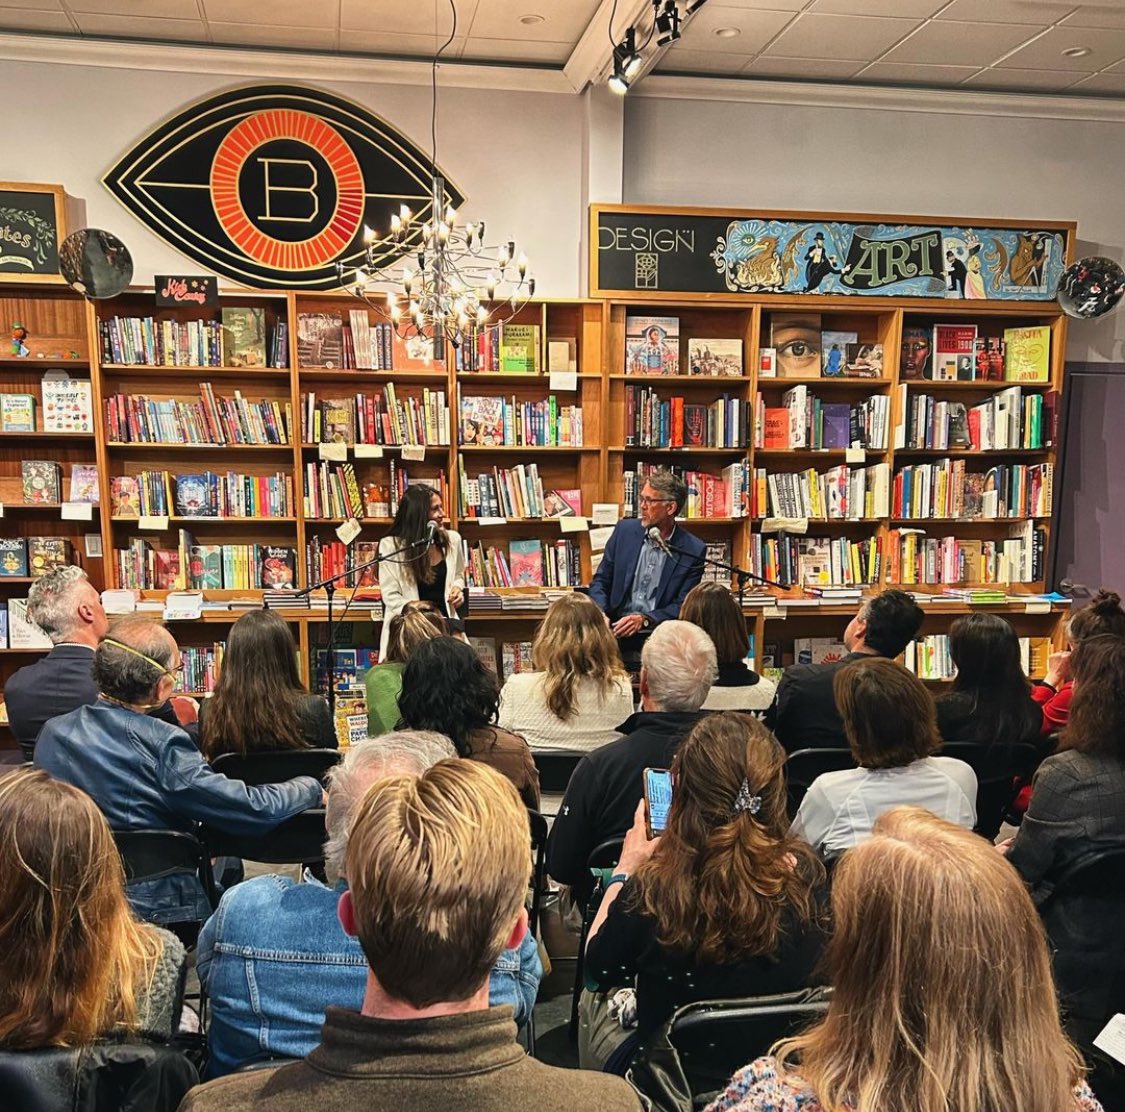 So at last night’s San Francisco book launch, 2 guys showed up because they just came back from Maui where they saw someone reading Your Presence Is Mandatory by the pool… 😱 Thanks to @Booksmith for hosting such an amazing night.